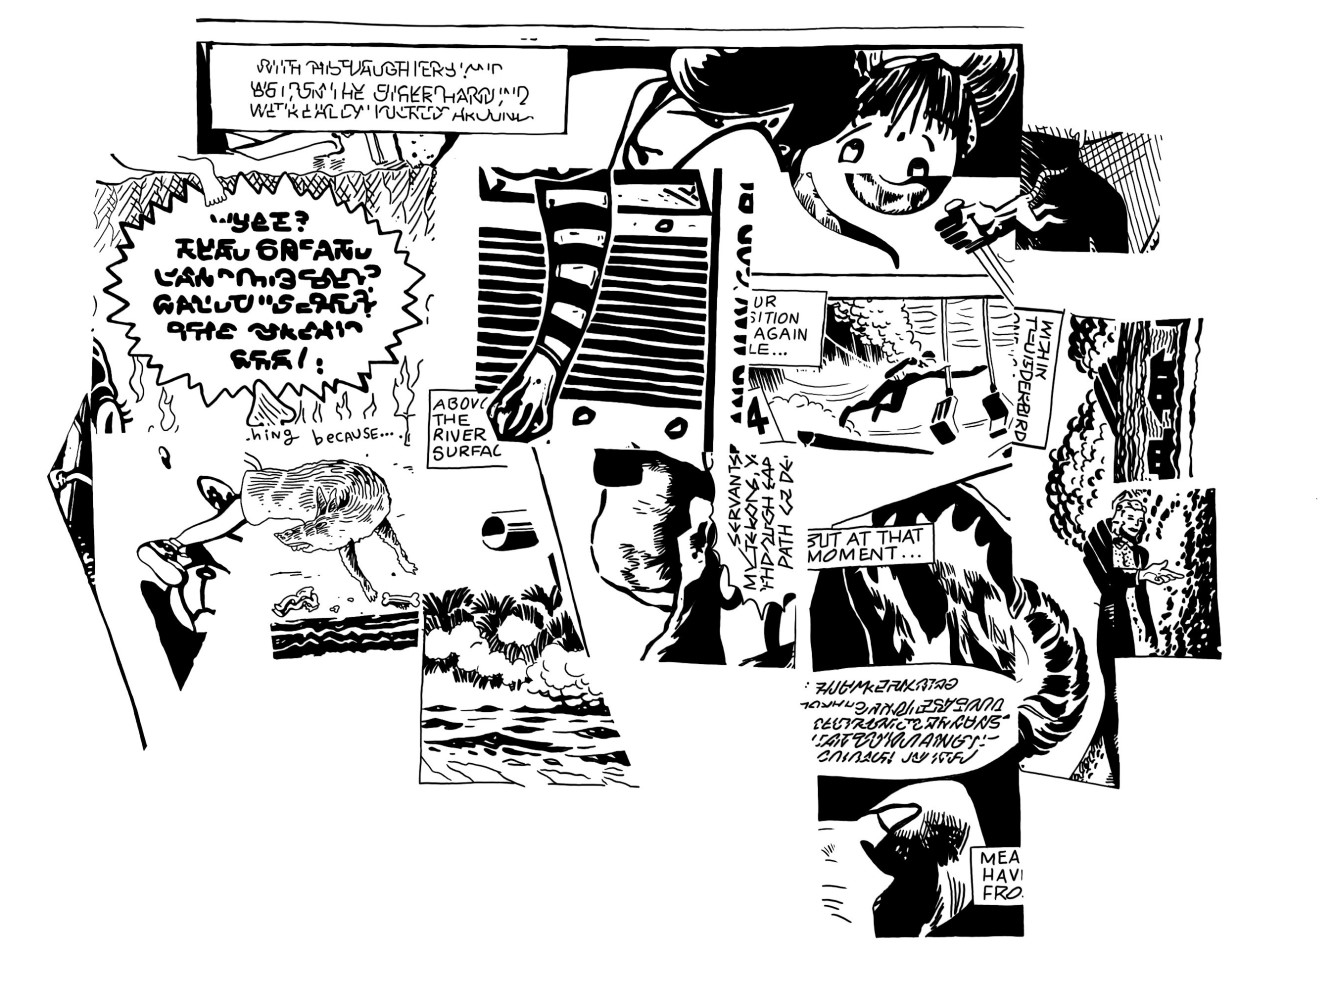 Comic-style painting in black and white